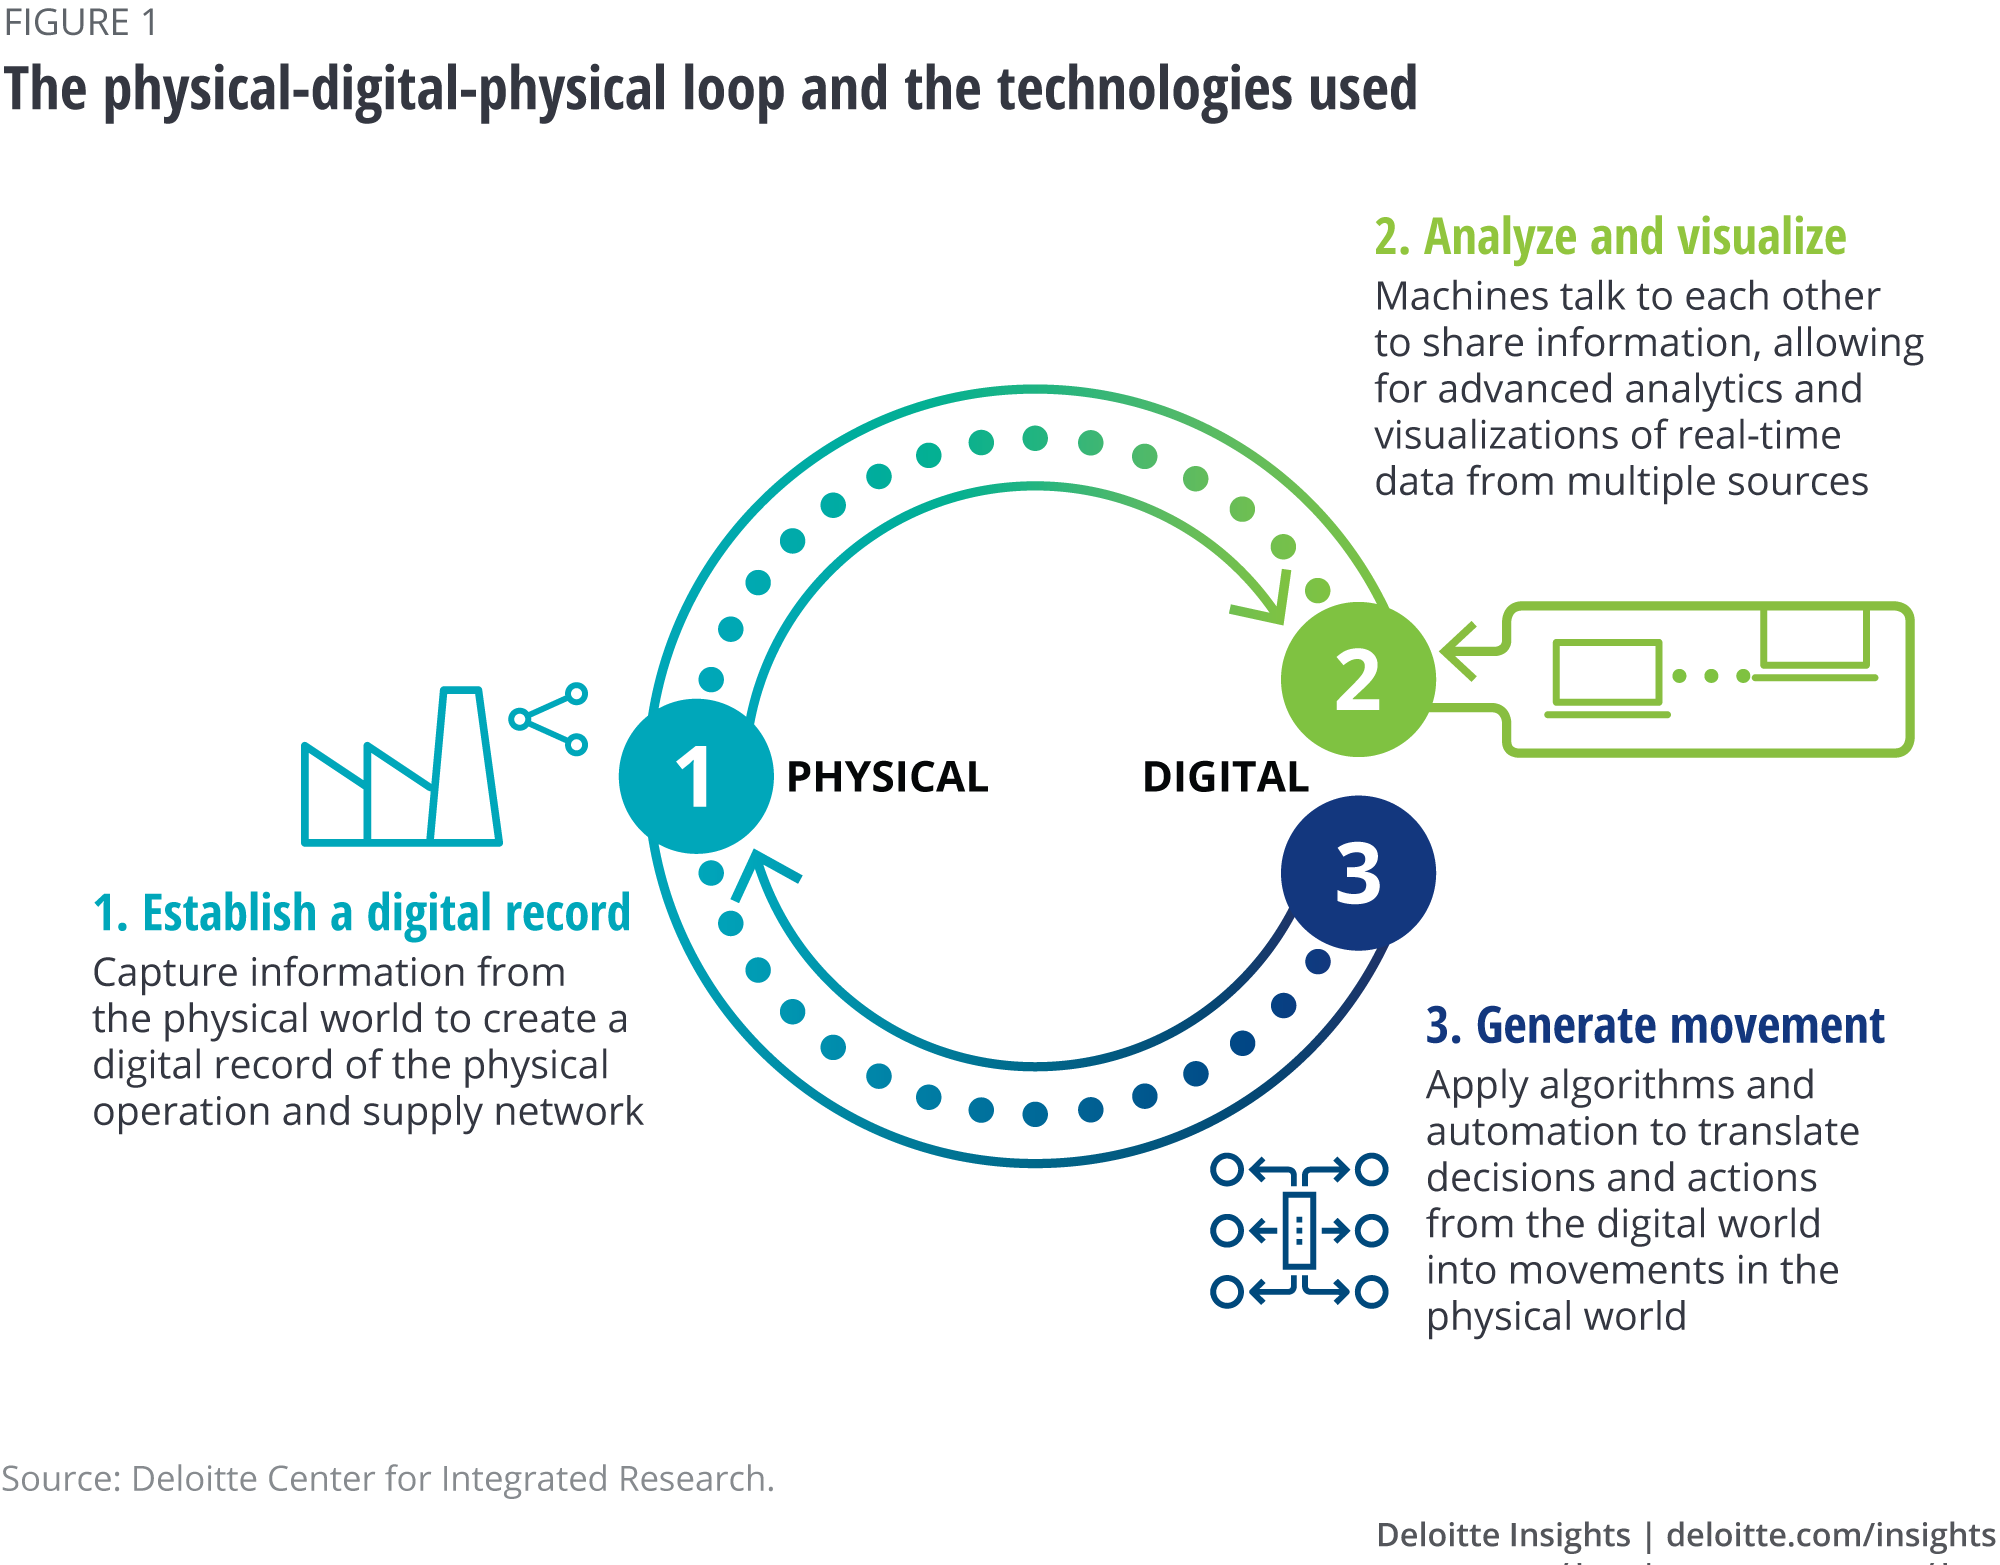 The physical-digital-physical loop and the technologies used